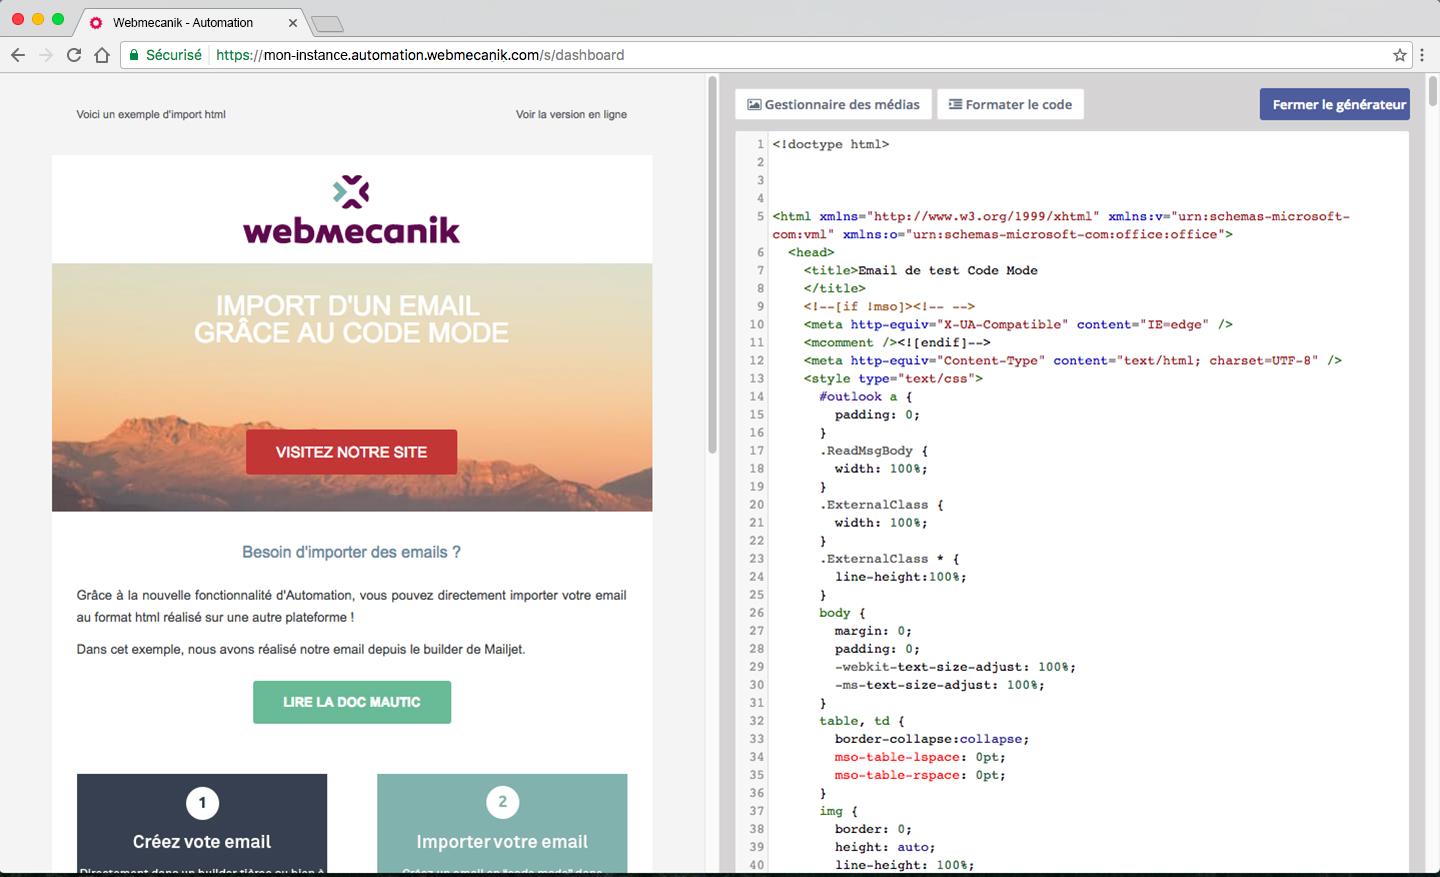 Webmecanik Automation - Publisher email with possibility to edit HTML emails